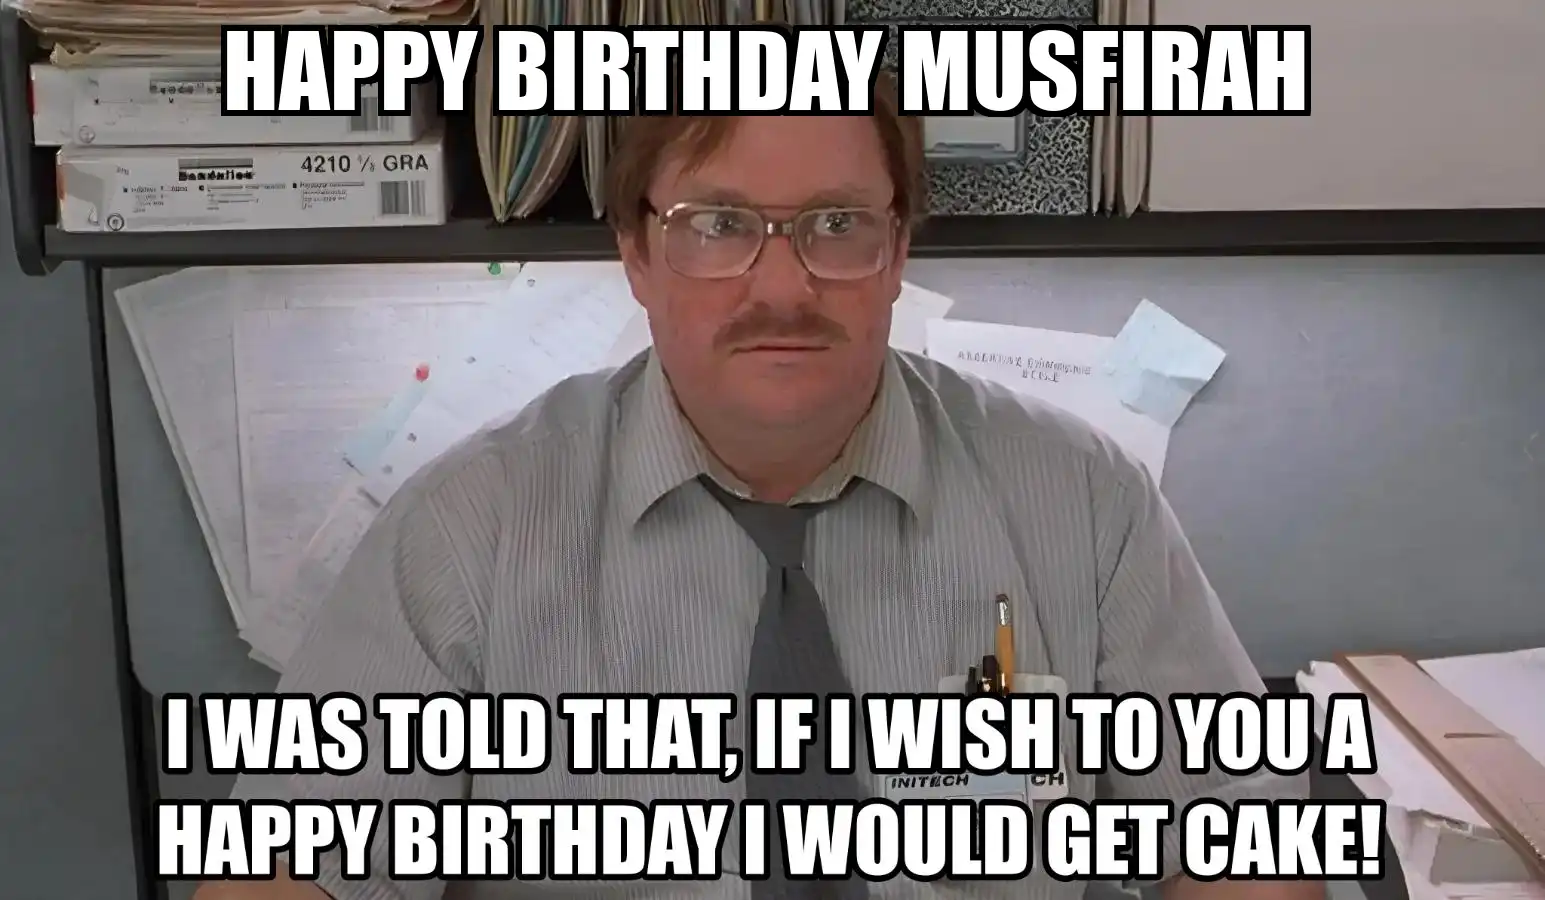 Happy Birthday Musfirah I Would Get A Cake Meme